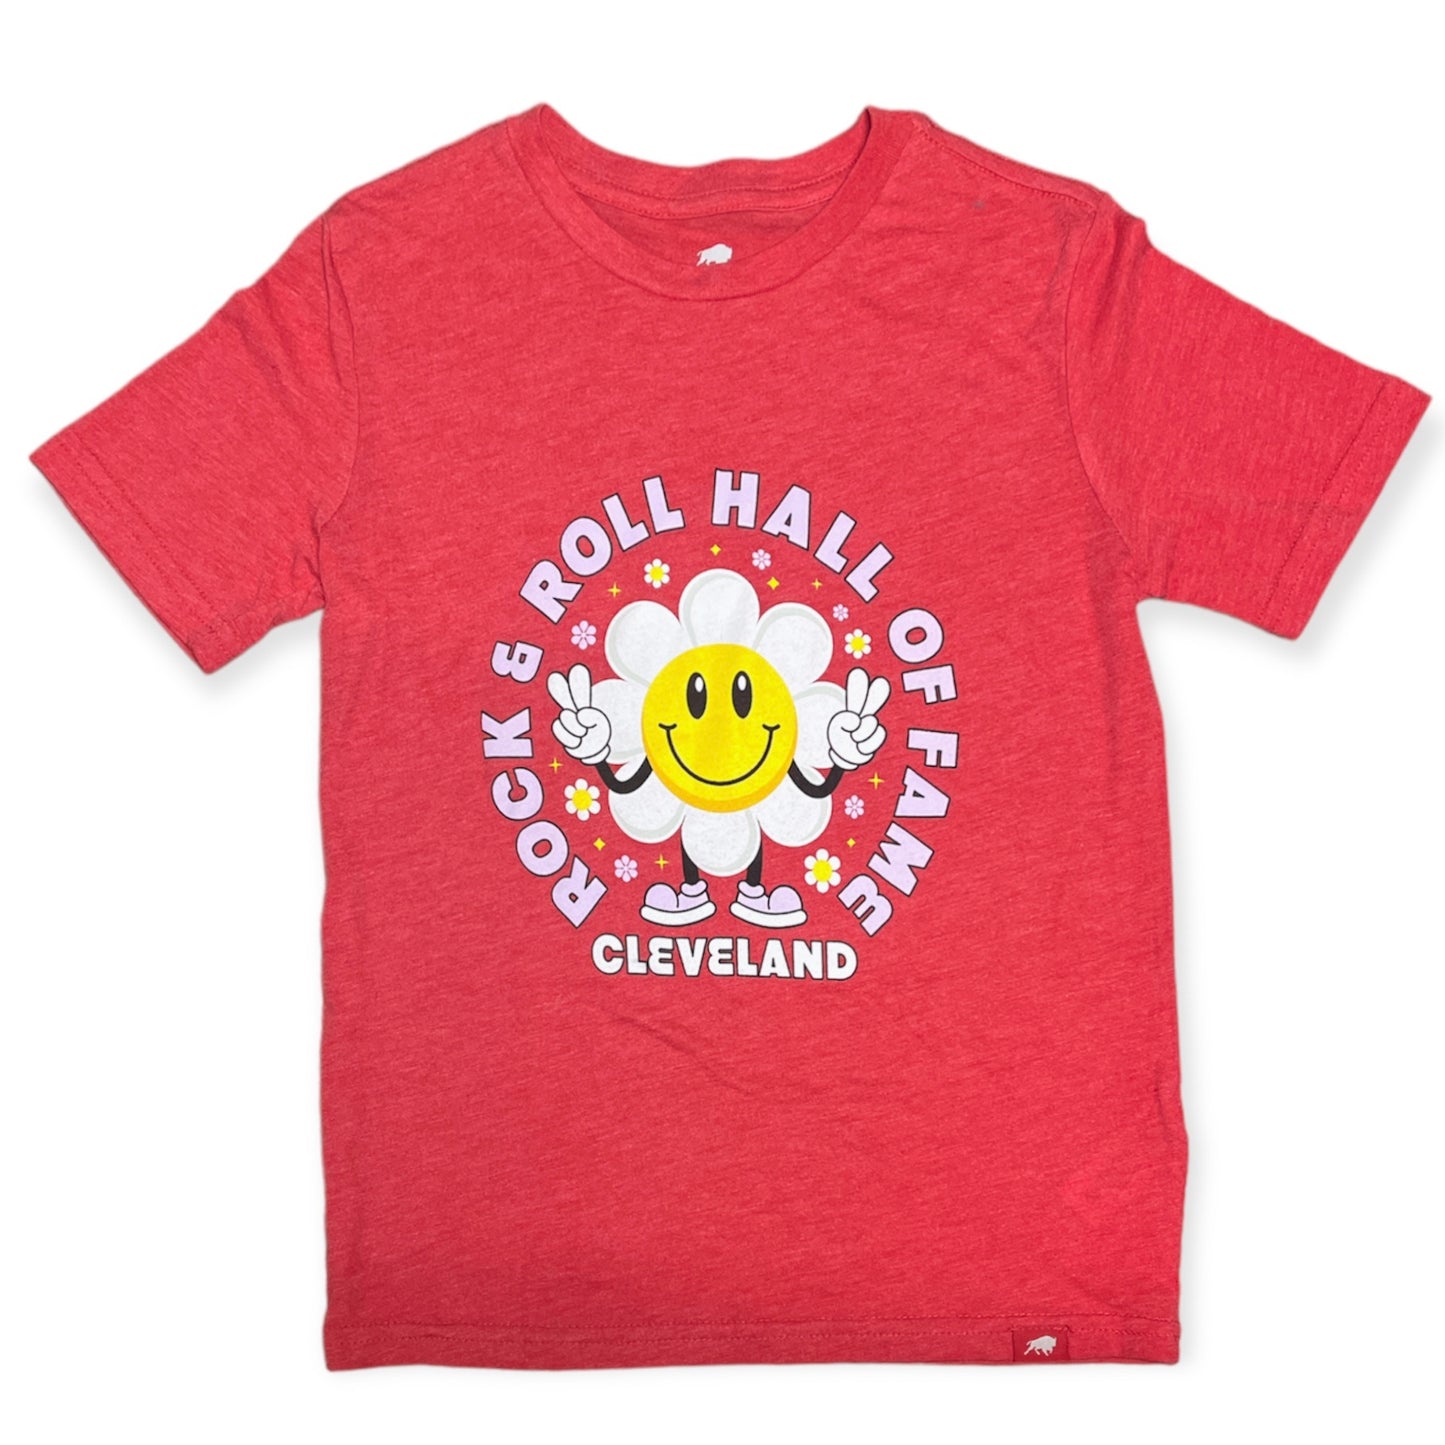 ROCK HALL PEACE SMILEY SUNFLOWER YOUTH T-SHIRT